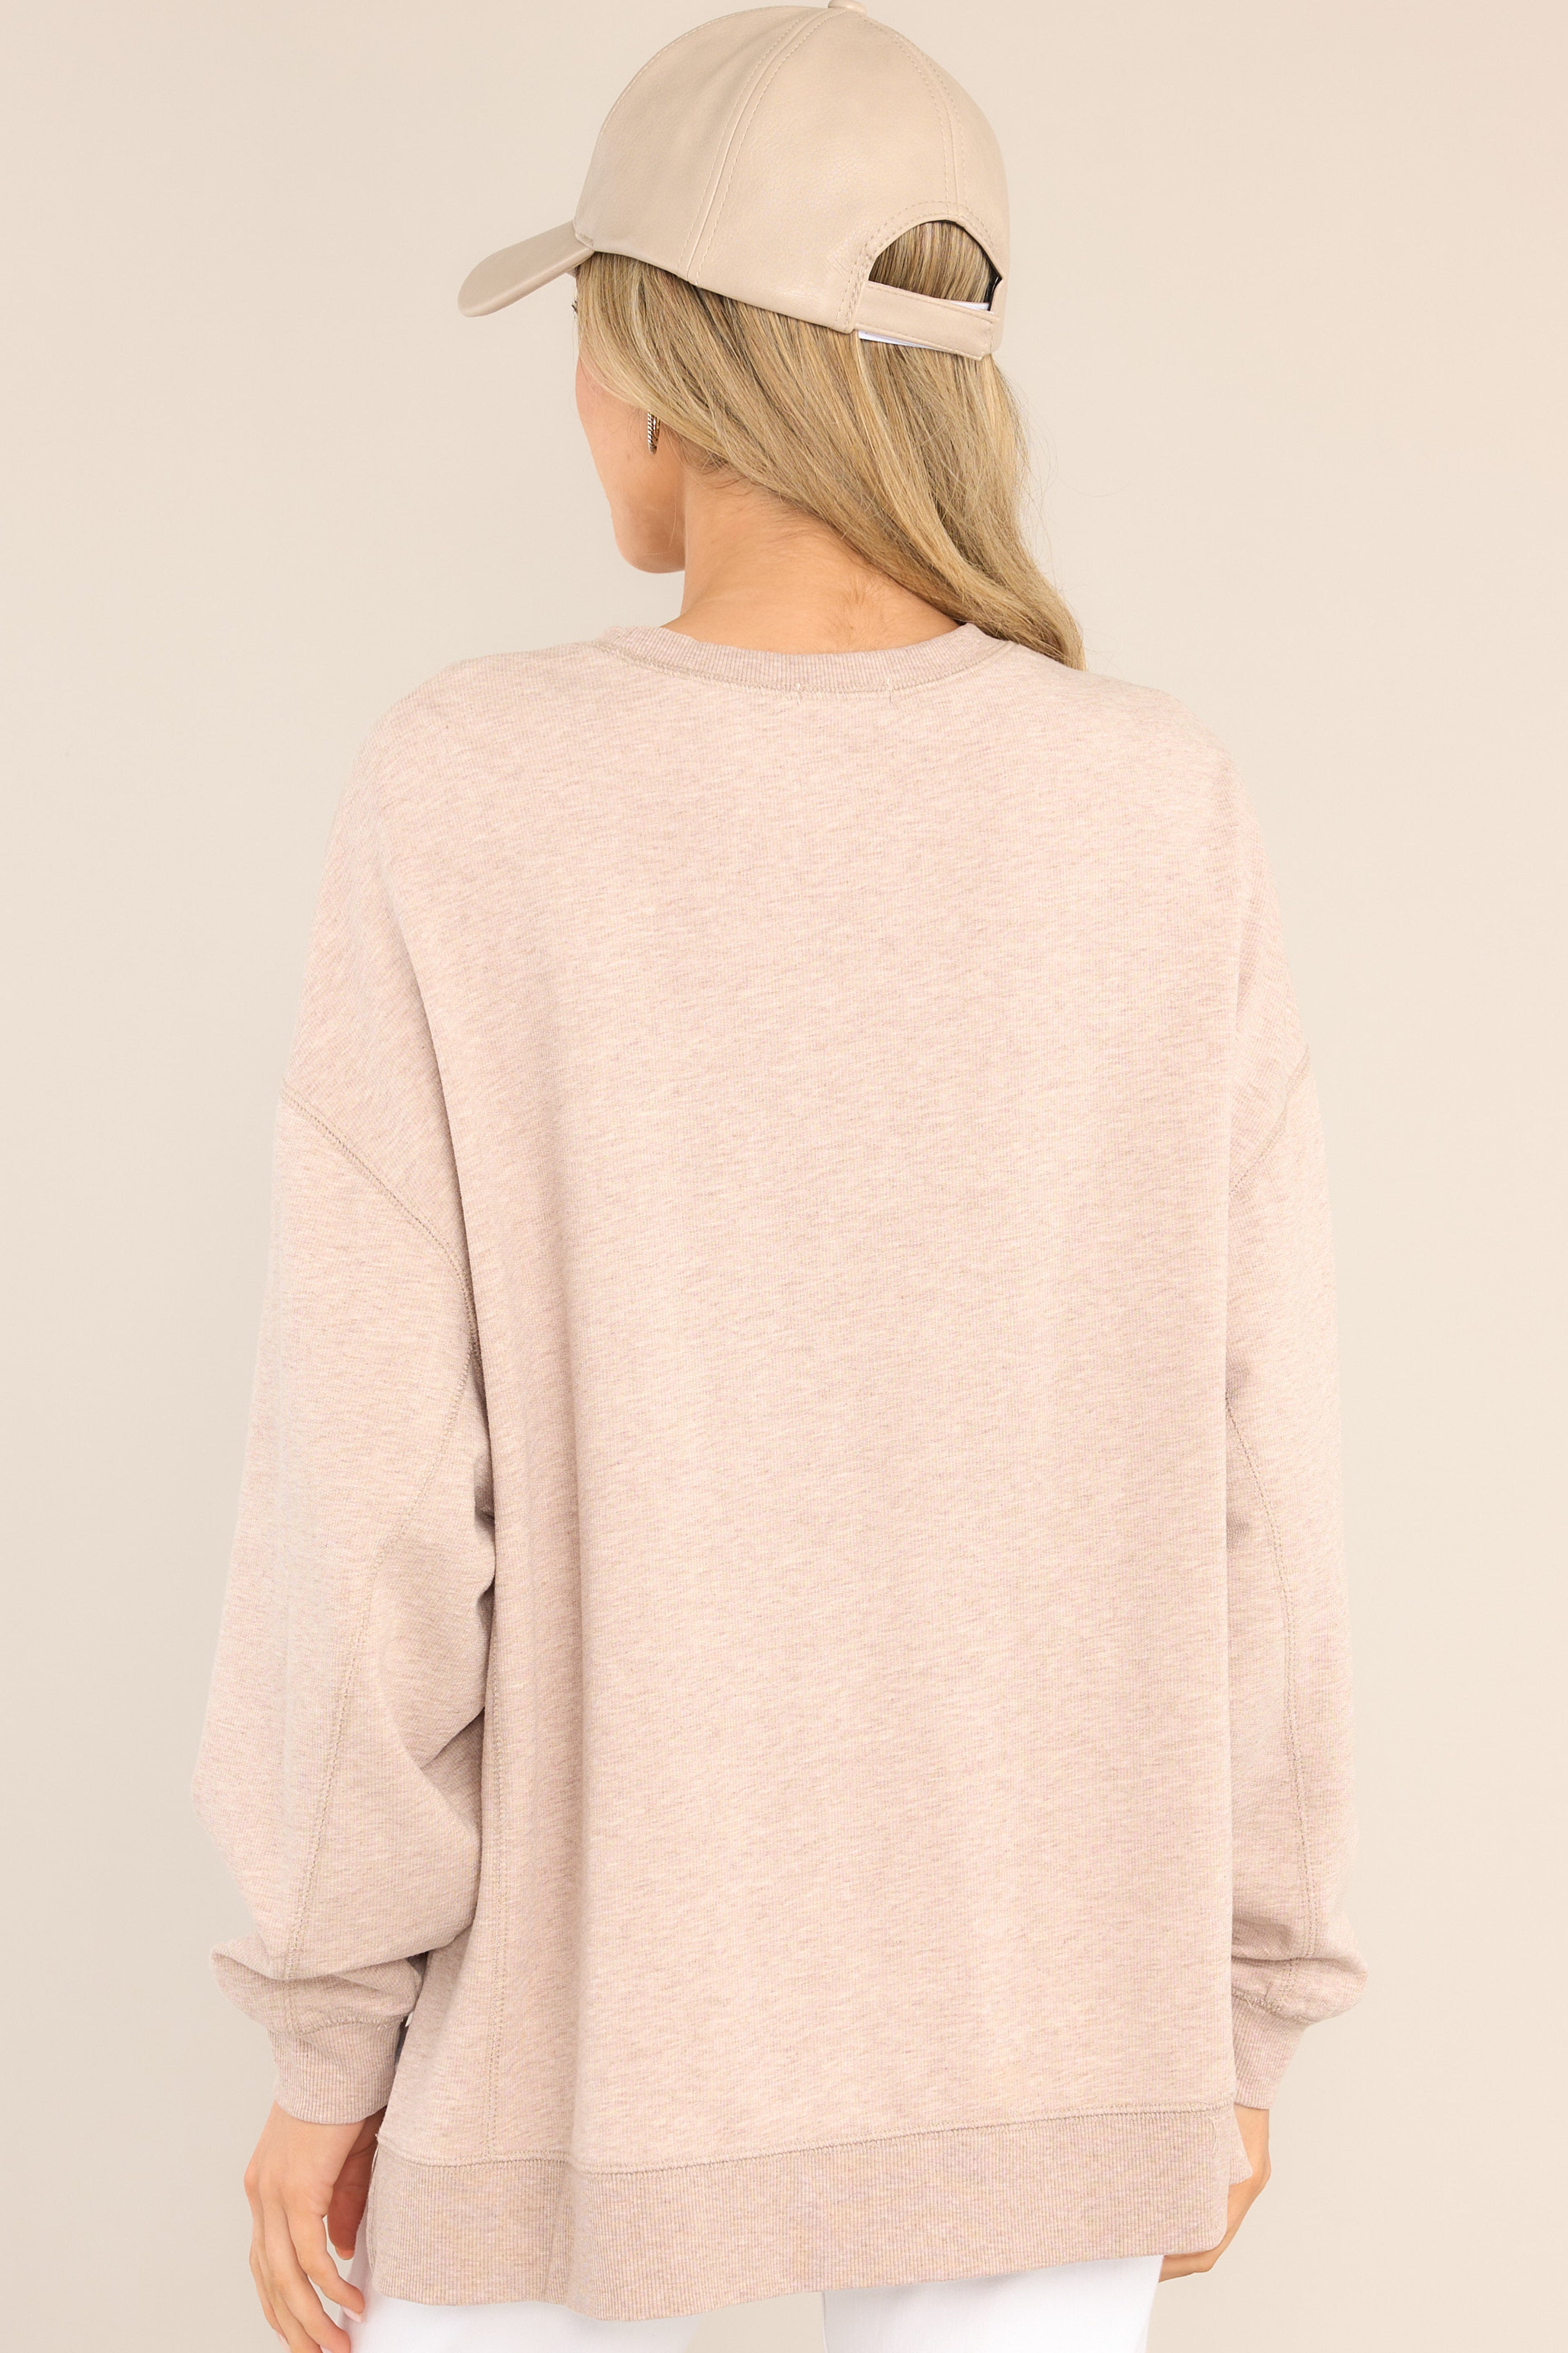 Back view of this top that features a crew neckline, dropped shoulders, ribbed cuffed sleeves, and a high-low split hemline.